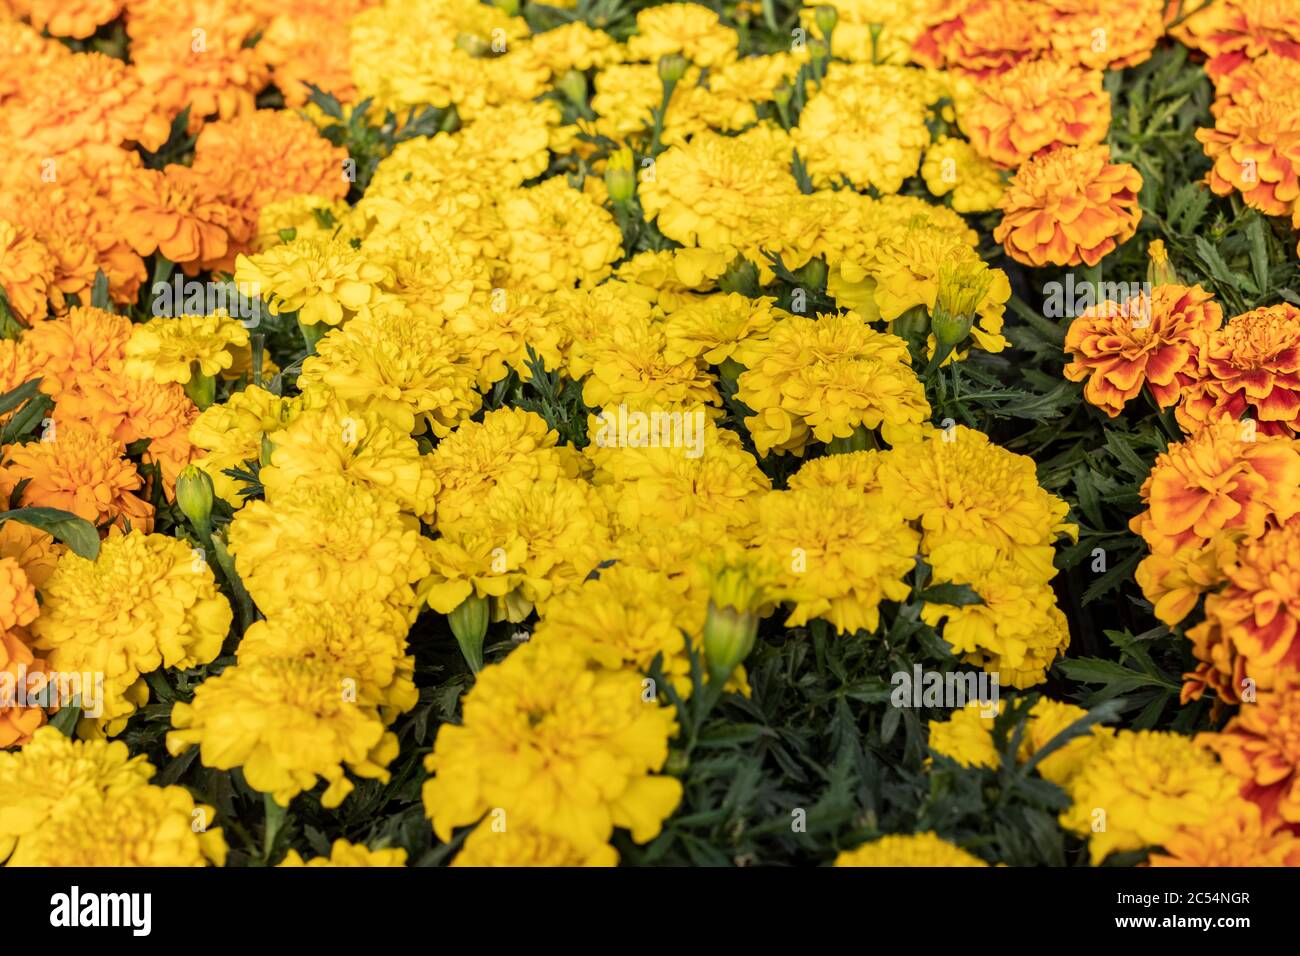 Student flowers in different colors Stock Photo